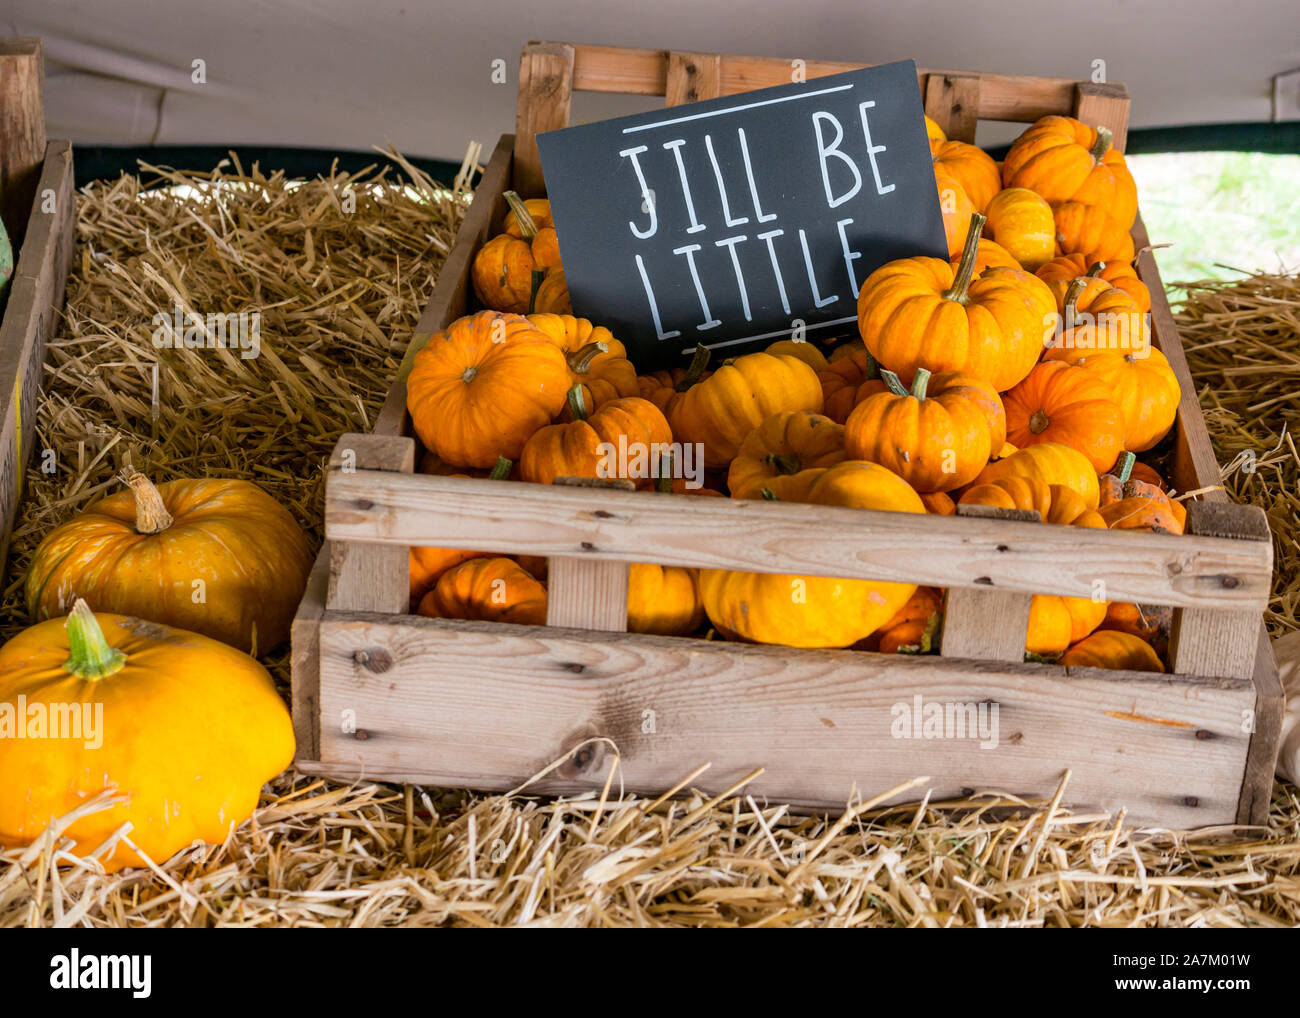 Crate of Jill Be Little culinary pumpkins for sale at a pumpkin patch farm at Halloween time, East Lothian, Scotland, UK Stock Photo